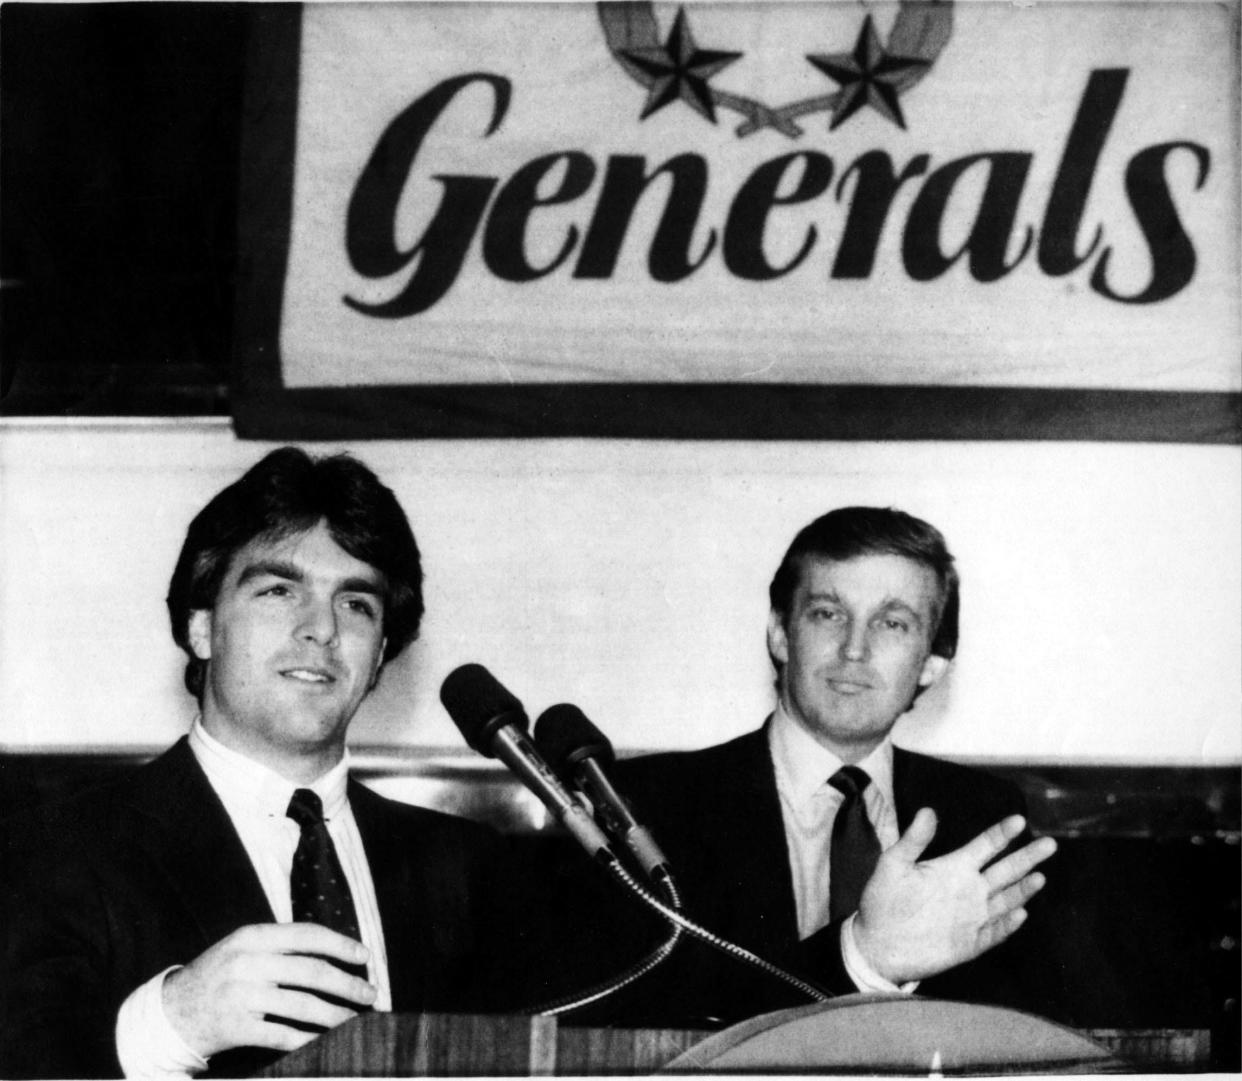 Doug Flutie speaks while sitting next to Donald Trump as a New Jersey Generals news conference.